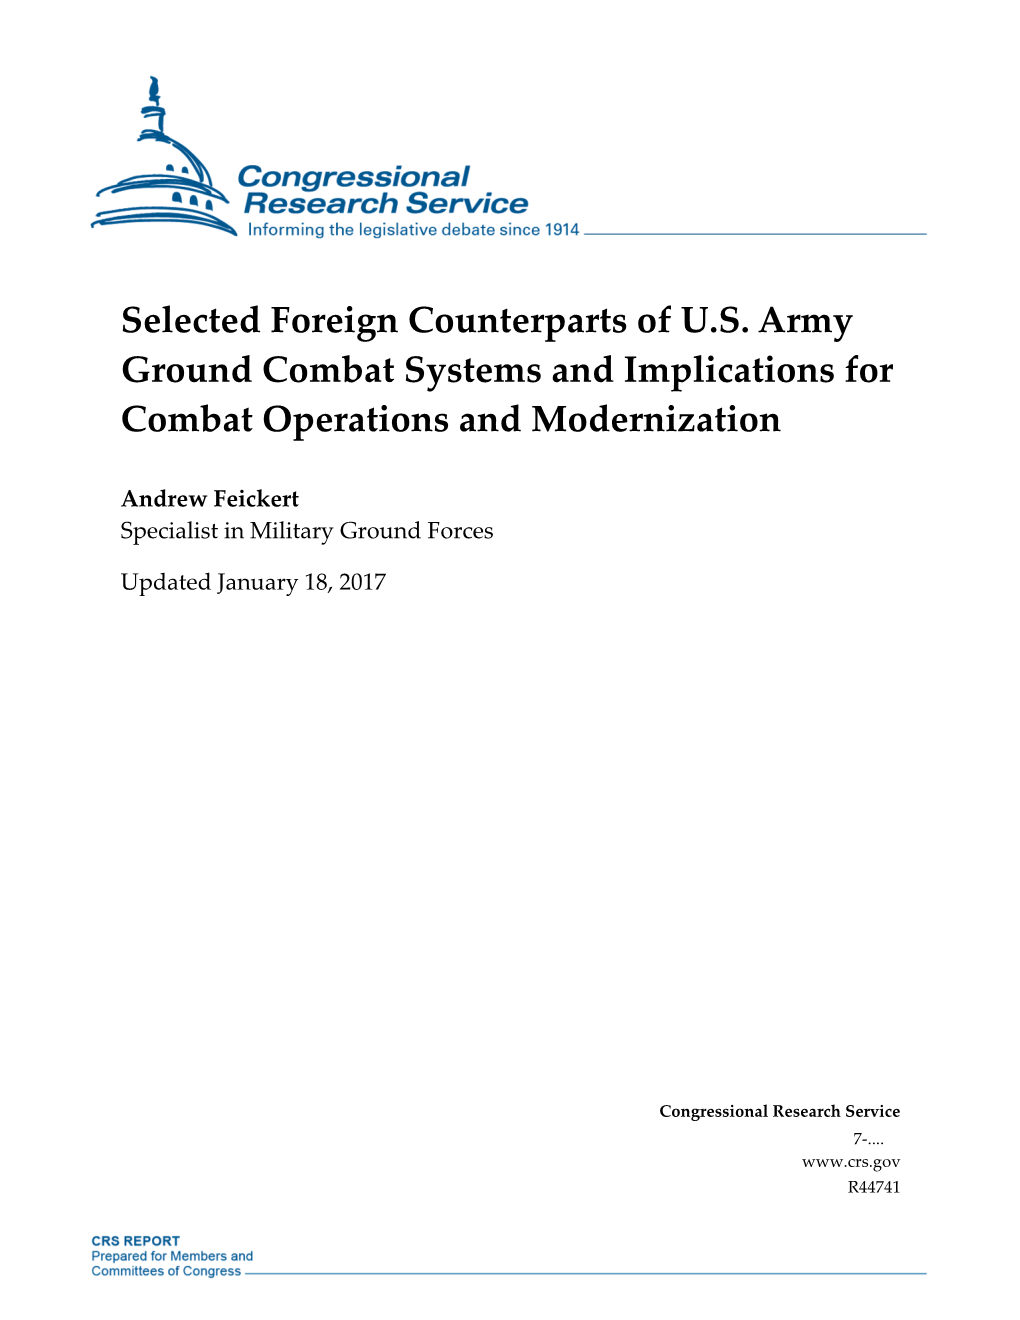 Selected Foreign Counterparts of U.S. Army Ground Combat Systems and Implications for Combat Operations and Modernization